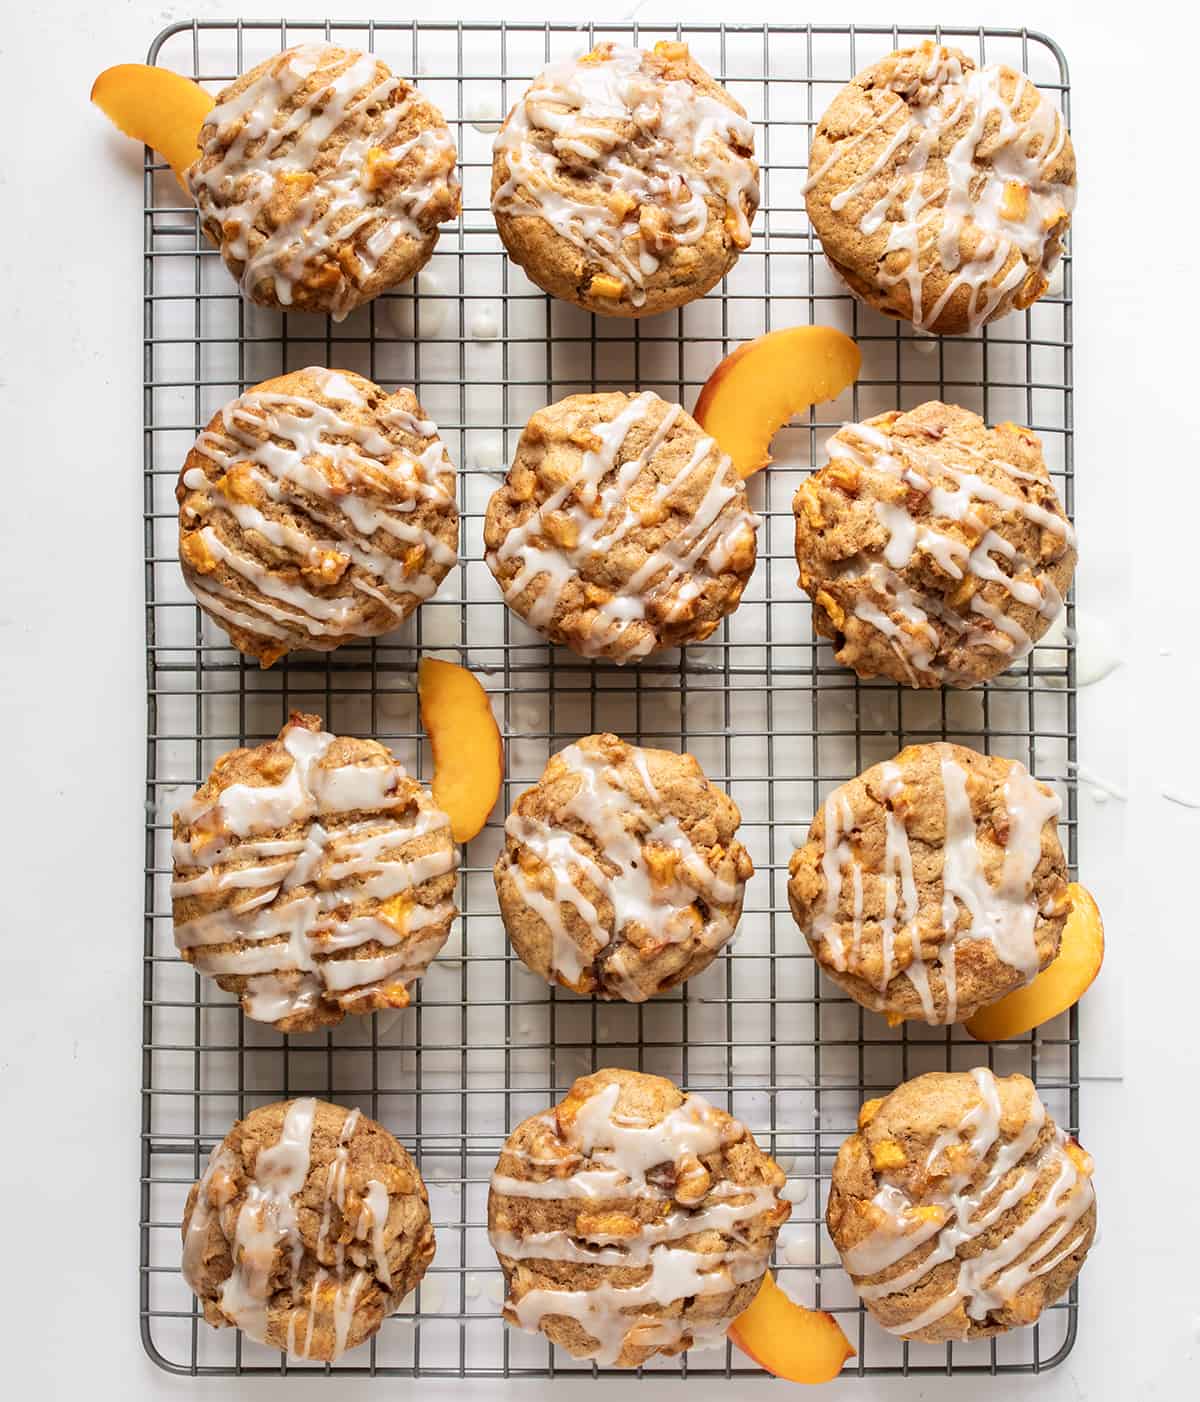 Peach Muffins on a Cooling Rack Covered in Glaze with a Few Peach Slices.